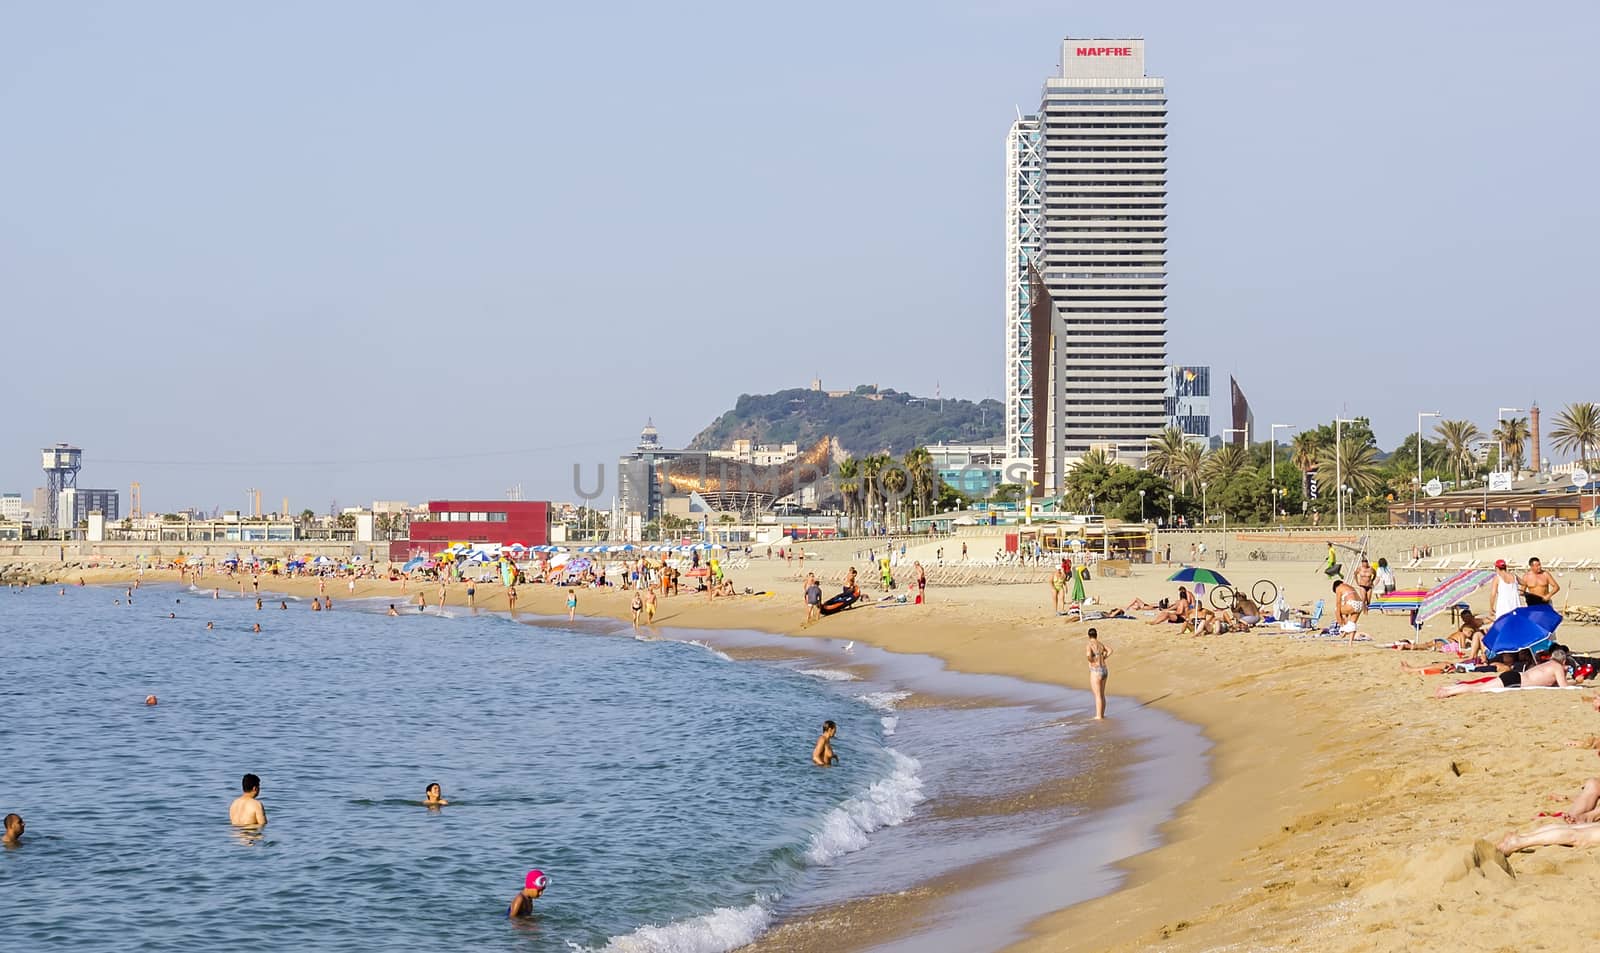 BARCELONA, SPAIN - JULY 5, 2015: Barceloneta Beach and skyscraper Torre Mapfre in the Olympic Port. It is named after its owner, Mapfre, an insurance company. This tower holds the title for highest helipad in Spain at 505 feet above ground.

Barcelona, Spain - July 5, 2015: Barceloneta Beach and skyscraper Torre Mapfre in the Olympic Port. It is named after its owner, Mapfre, an insurance company. This tower holds the title for highest helipad in Spain at 505 feet above ground. People are resting on the beach.